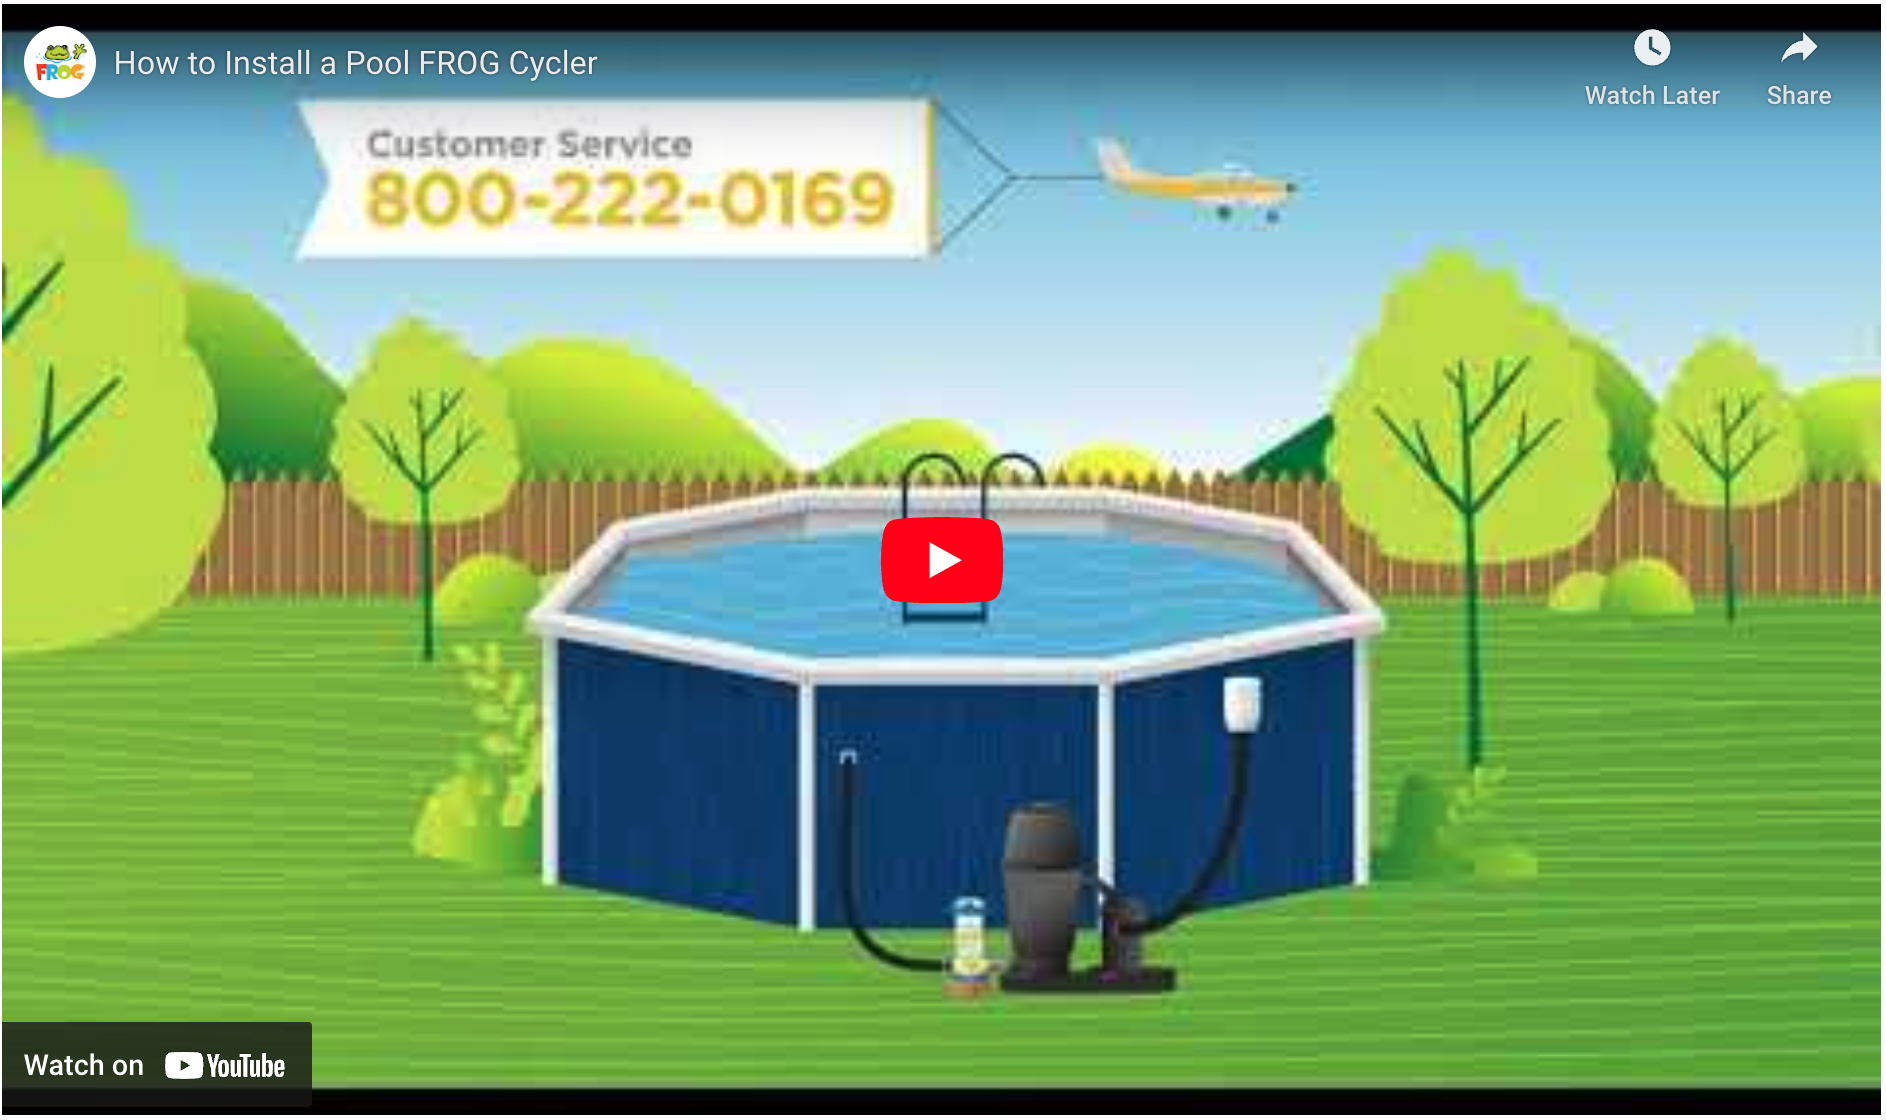 Pool Frog How to Install a Pool FROG Cycler